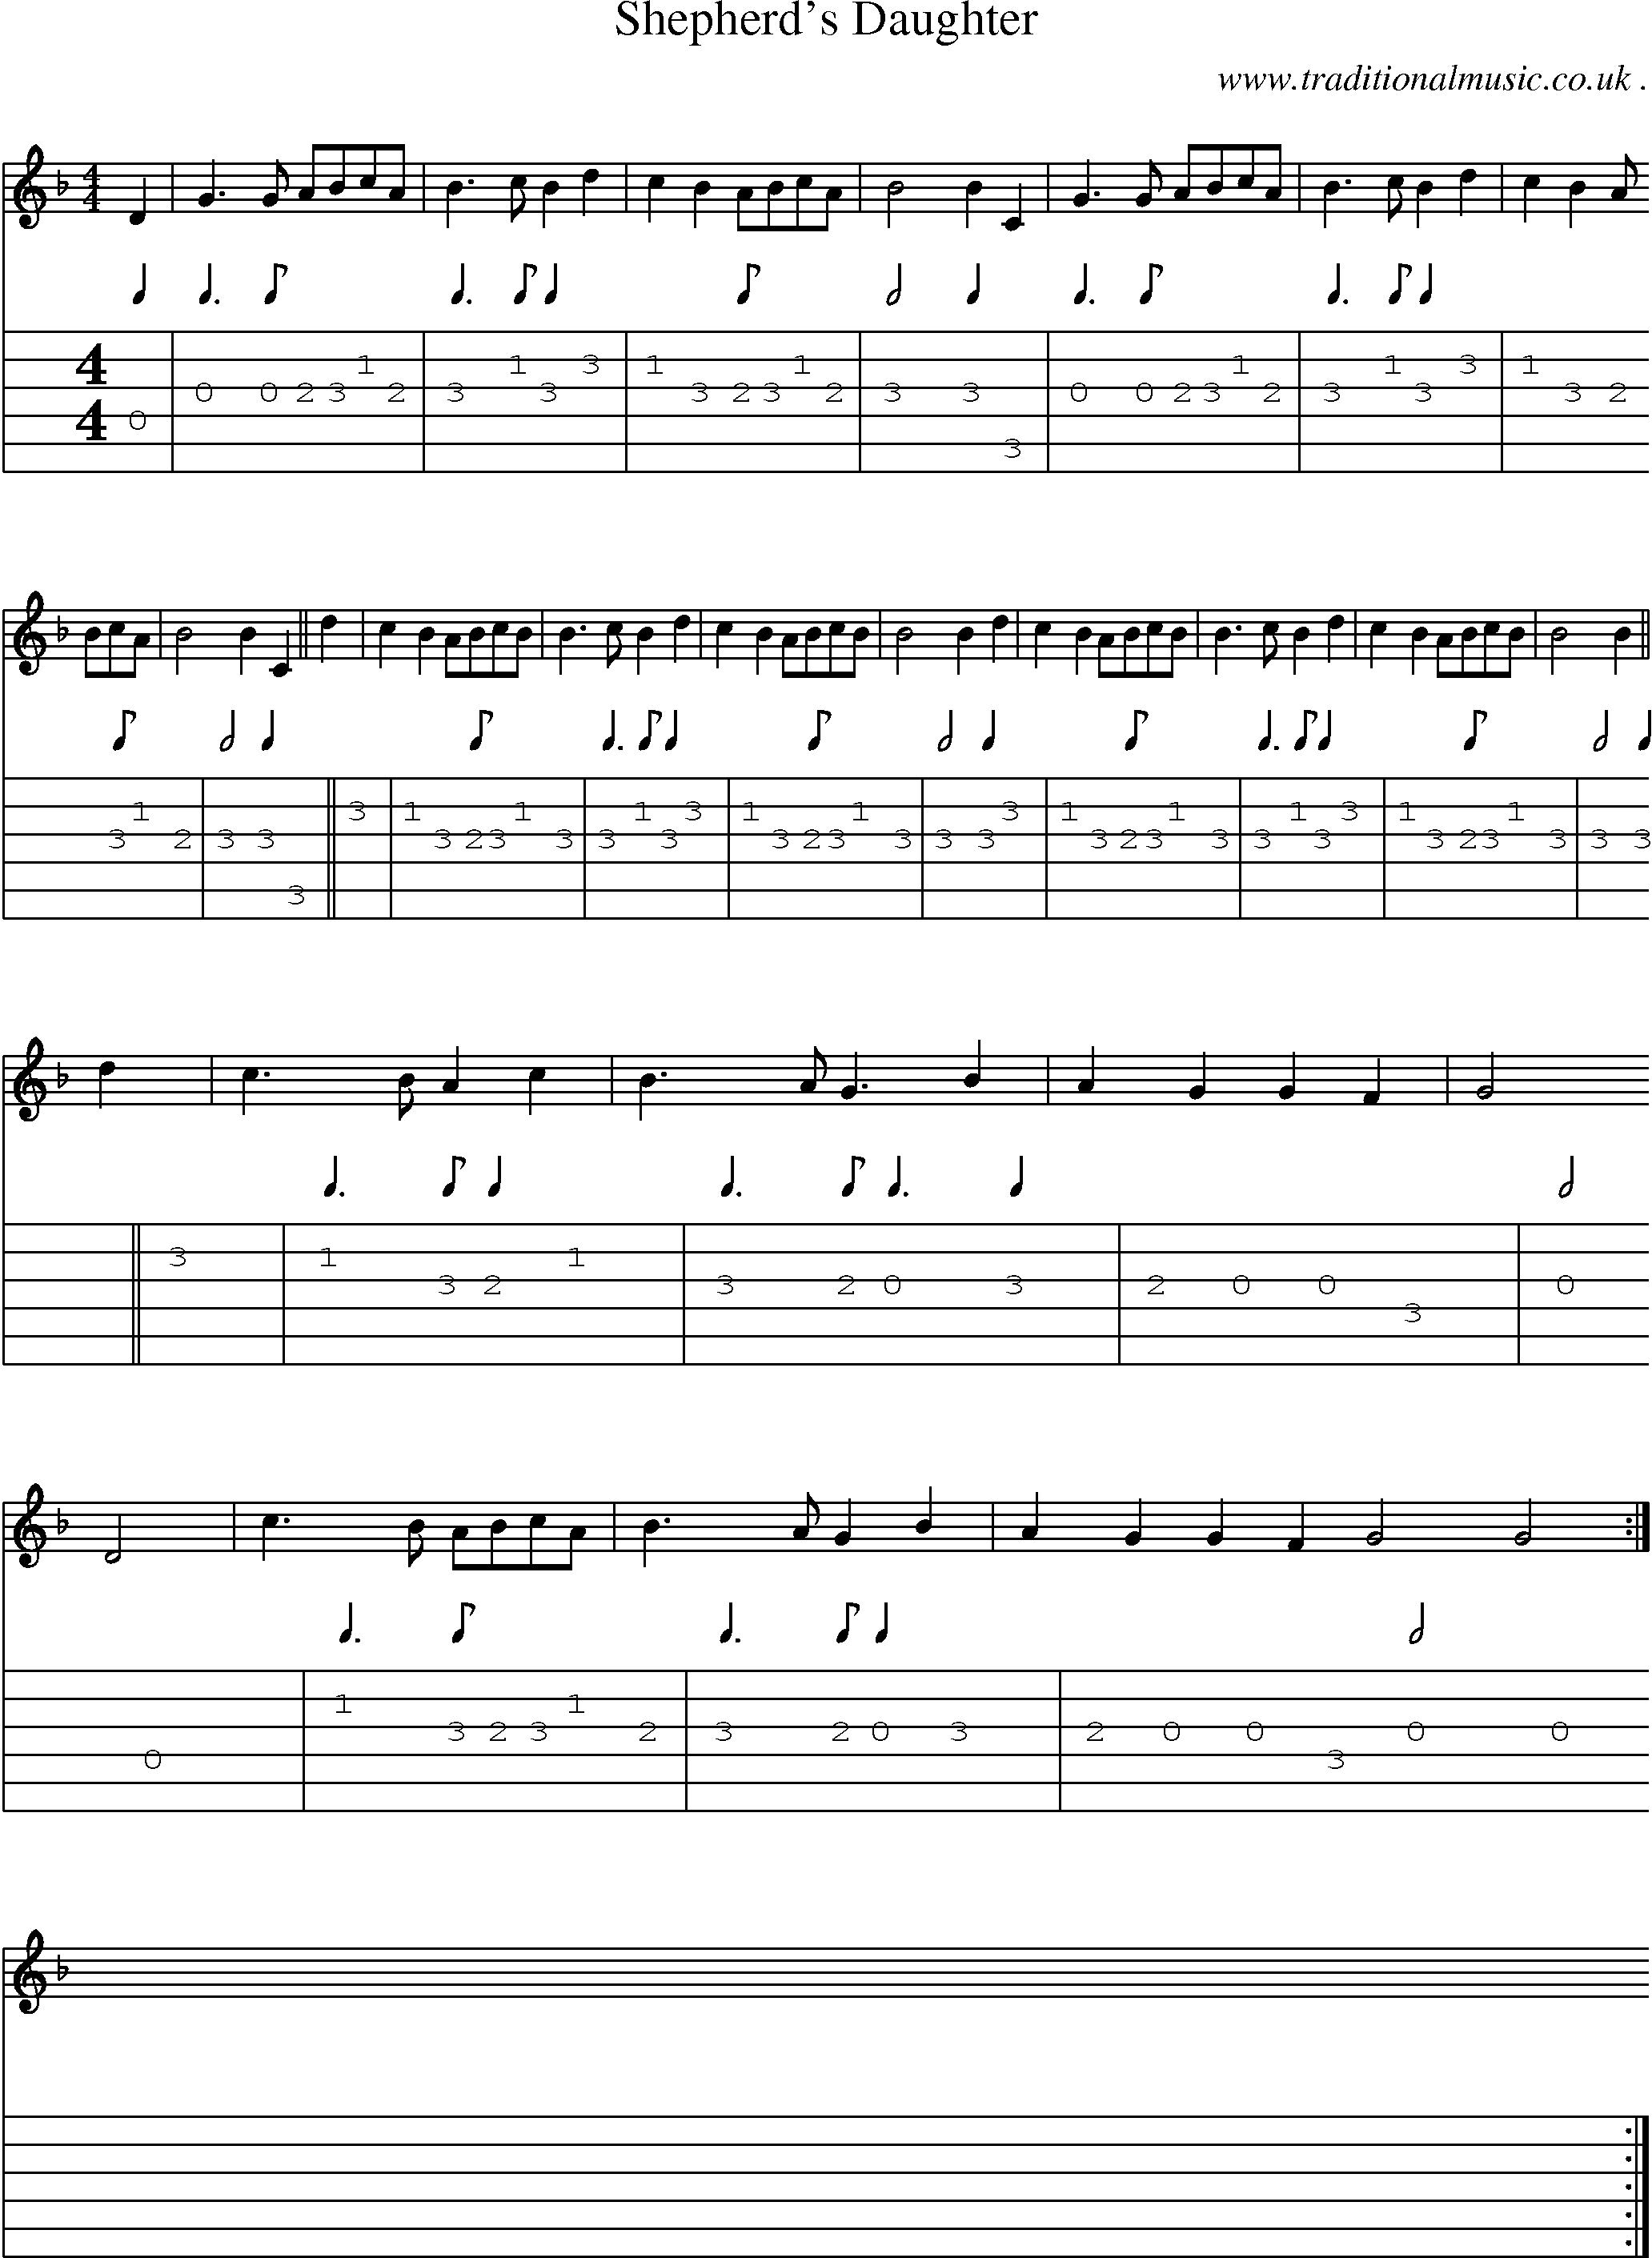 Sheet-Music and Guitar Tabs for Shepherds Daughter